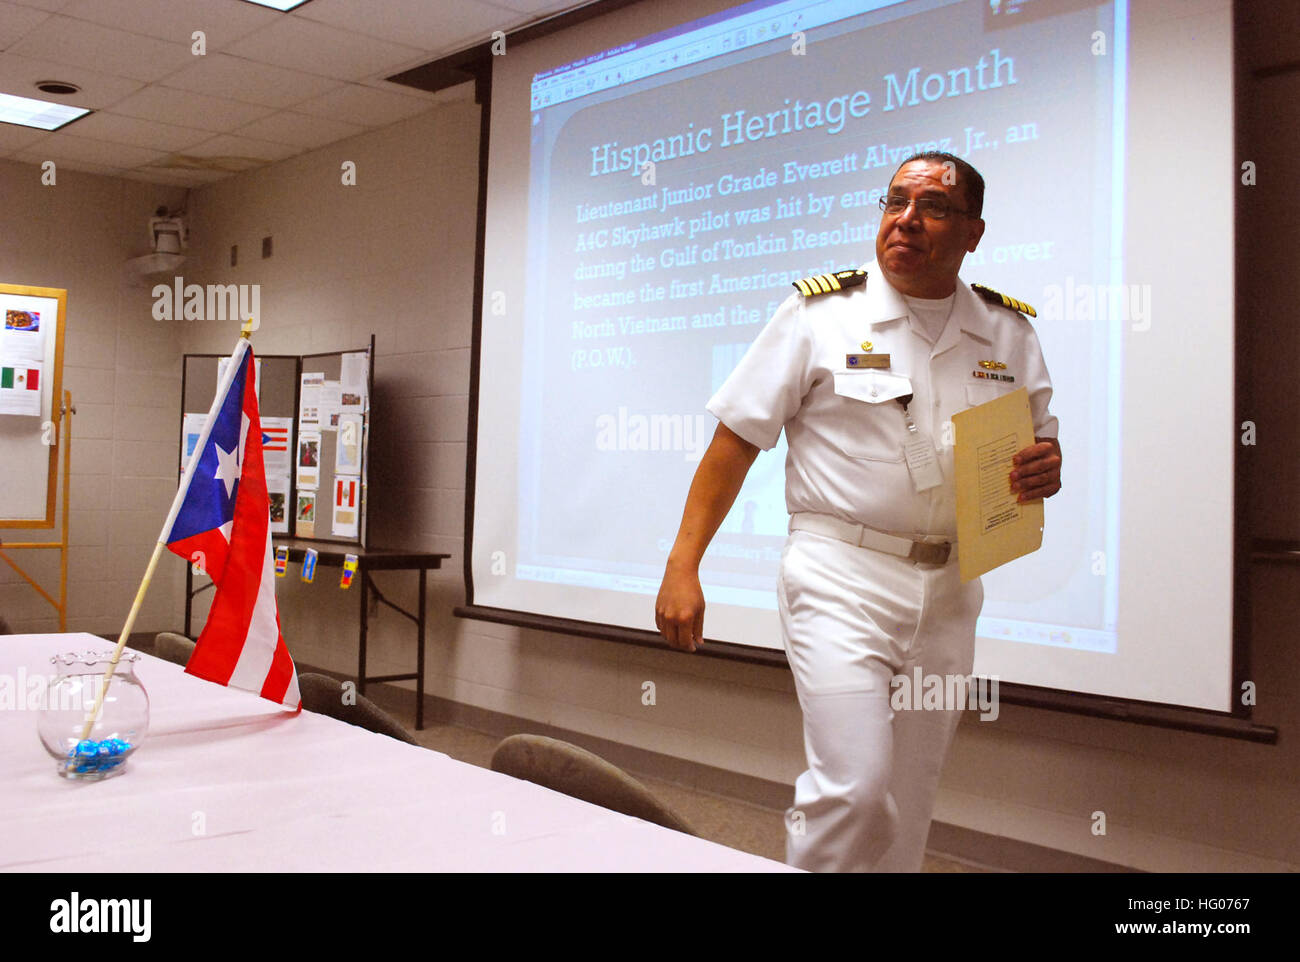 111011-N-GO179-001 JACKSONVILLE, Fla. (Oct. 11, 2011) Capt. Carlos Lebron, commanding officer of Navy Drug Screening Laboratory Jacksonville, delivers remarks to Sailors and civilian employees of Navy Medicine Support Command (NMSC). More than 50 people attended the NMSC Multi-Cultural Committee Hispanic Heritage Month observance at Naval Air Station Jacksonville. (U.S. Navy photo by Mass Communication Specialist 1st Class Bruce Cummins/Released) US Navy 111011-N-GO179-001 Capt. Carlos Lebron, commanding officer of Navy Drug Screening Laboratory Jacksonville, delivers remarks to Sailors and Stock Photo